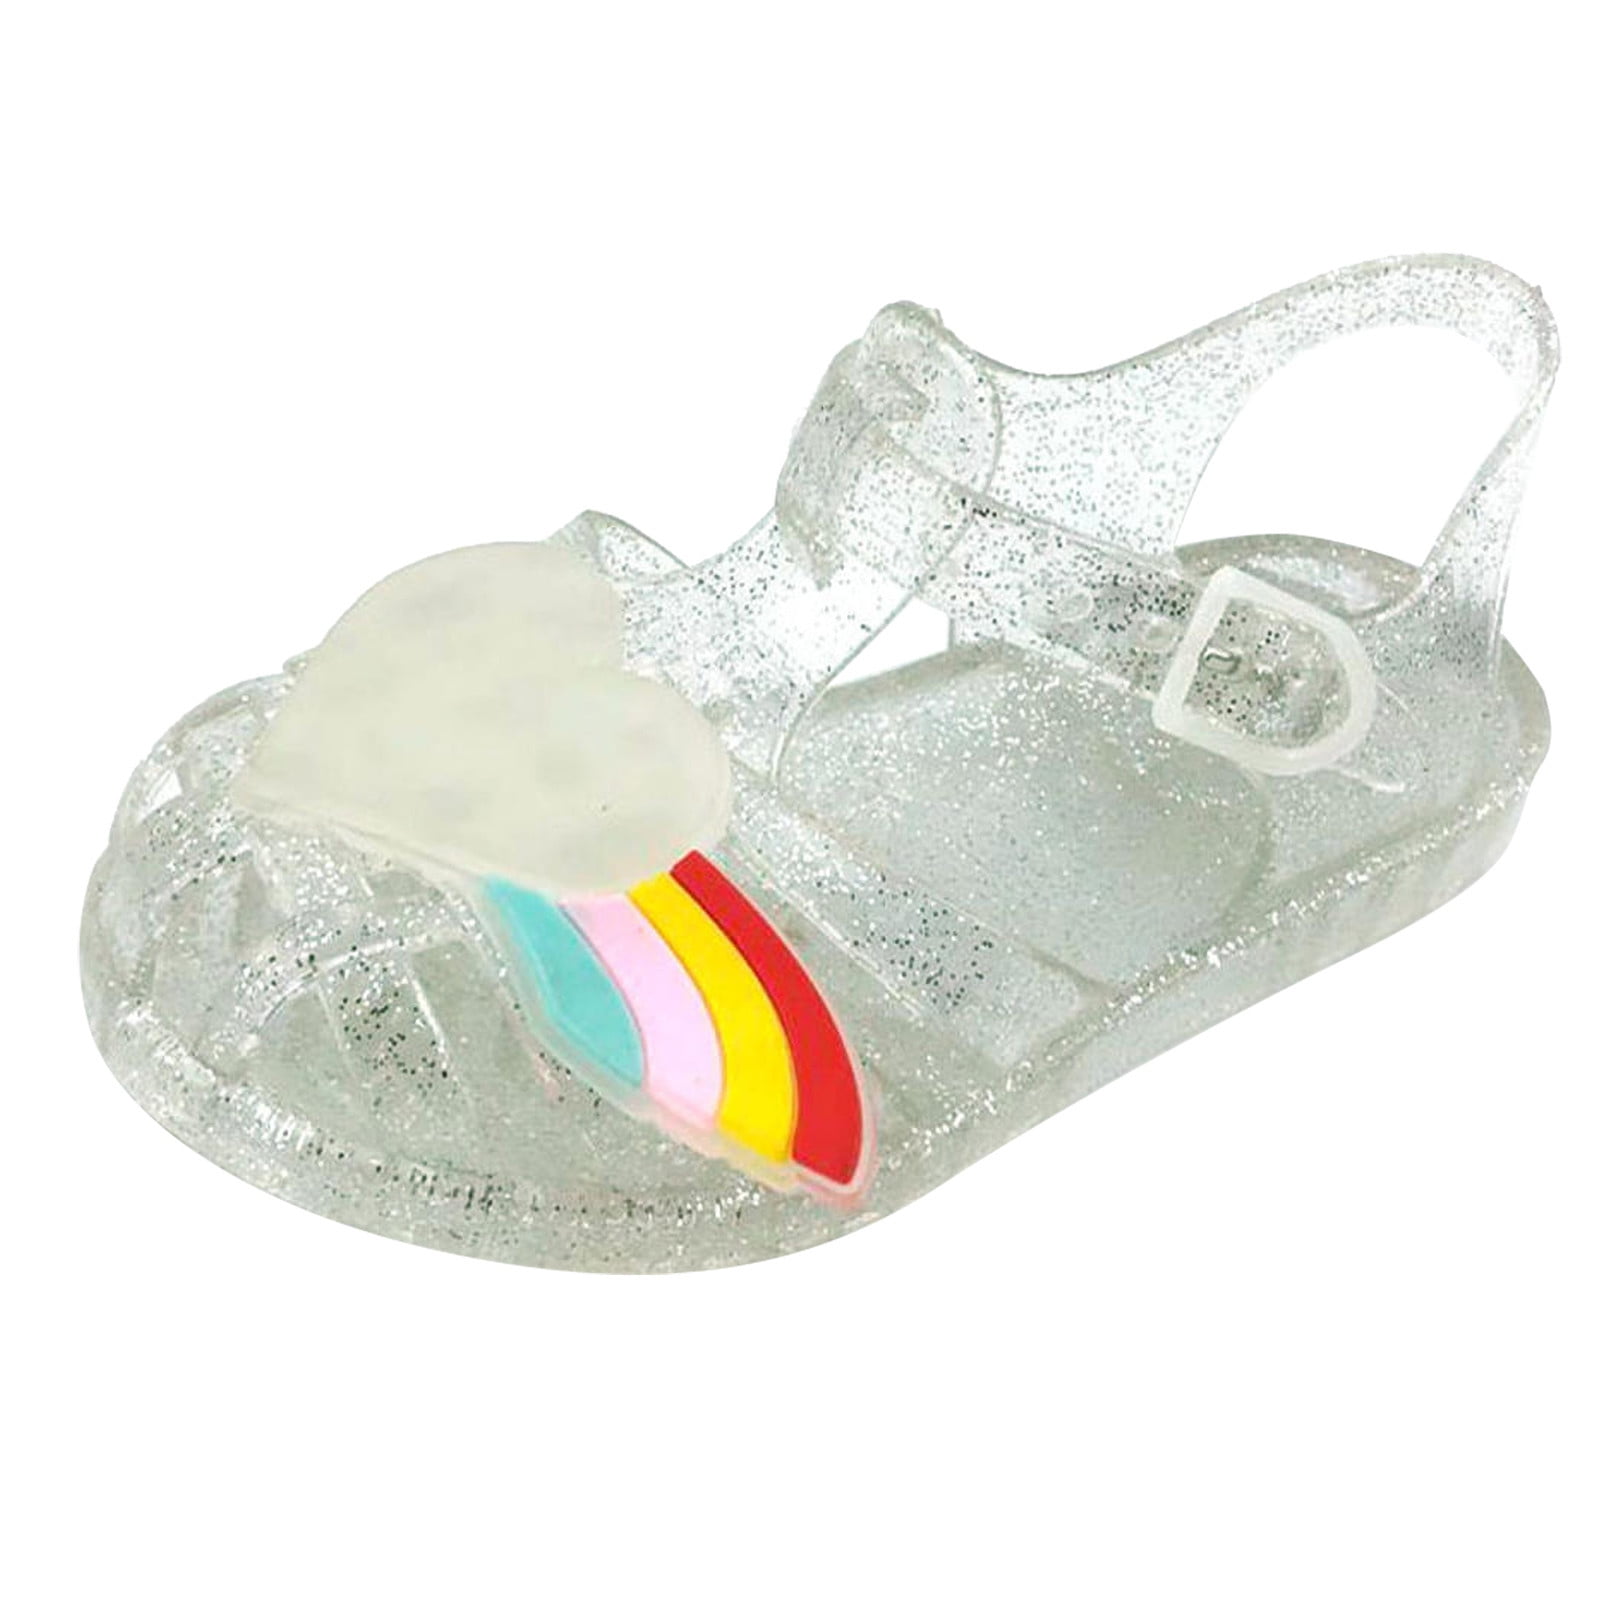 VerPetridure Clearance Kids Sandals Clearance Under $10 Toddler